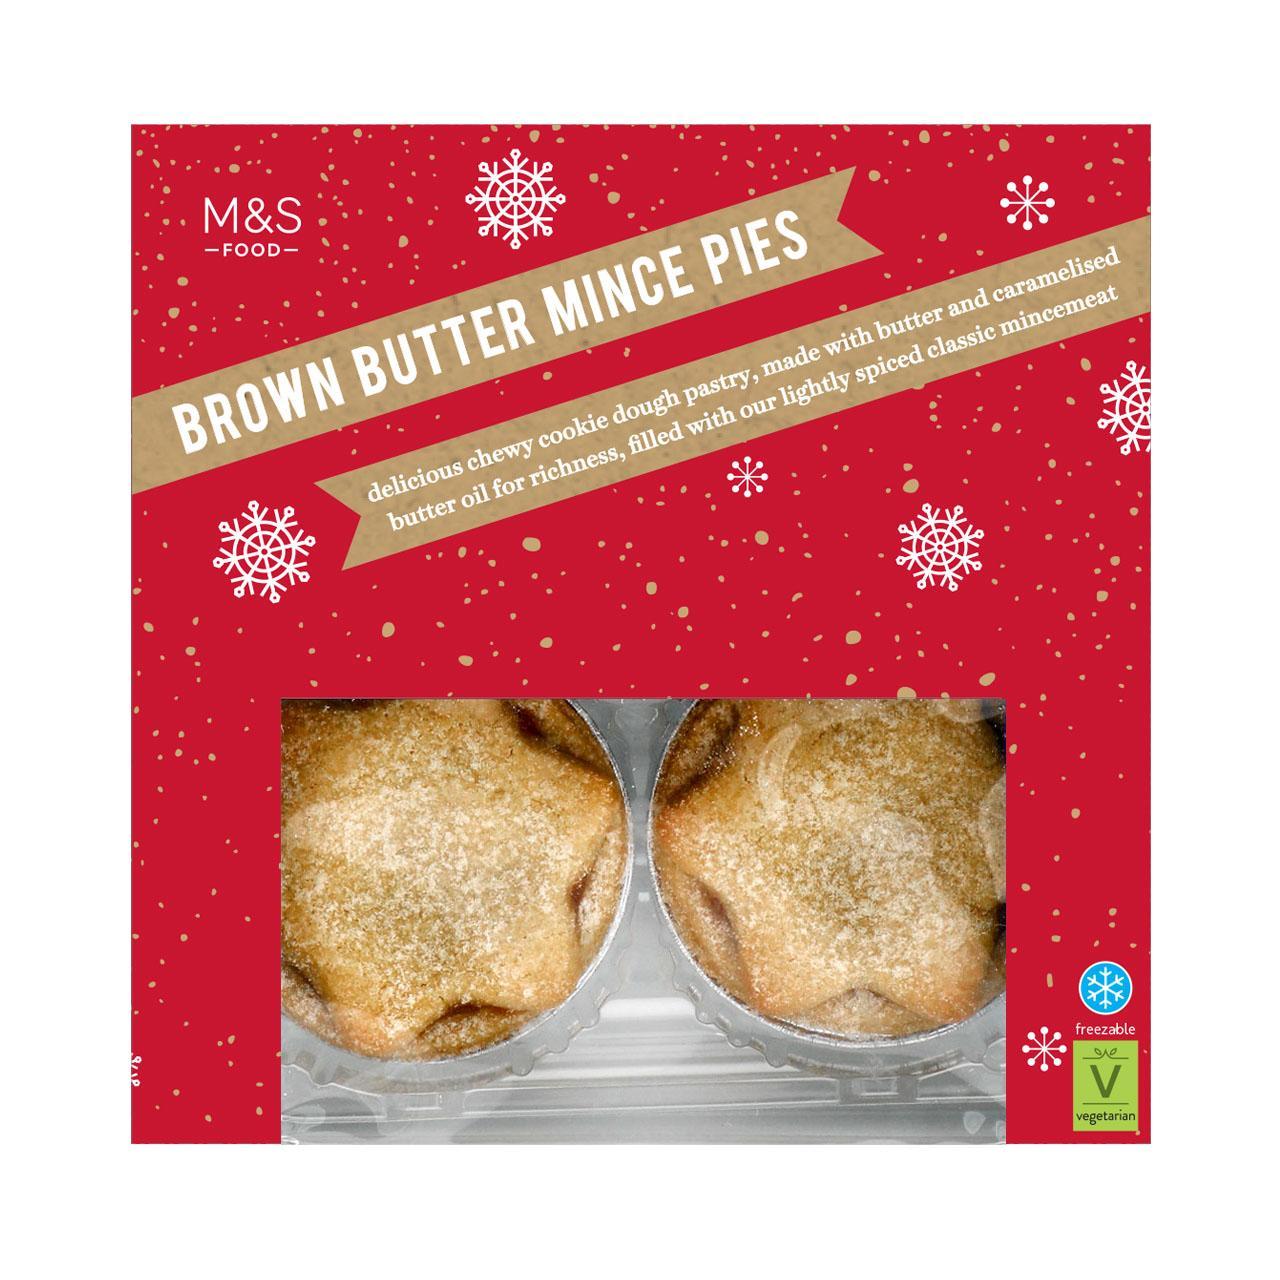 M&S 4 Brown Butter Mince Pies 254g